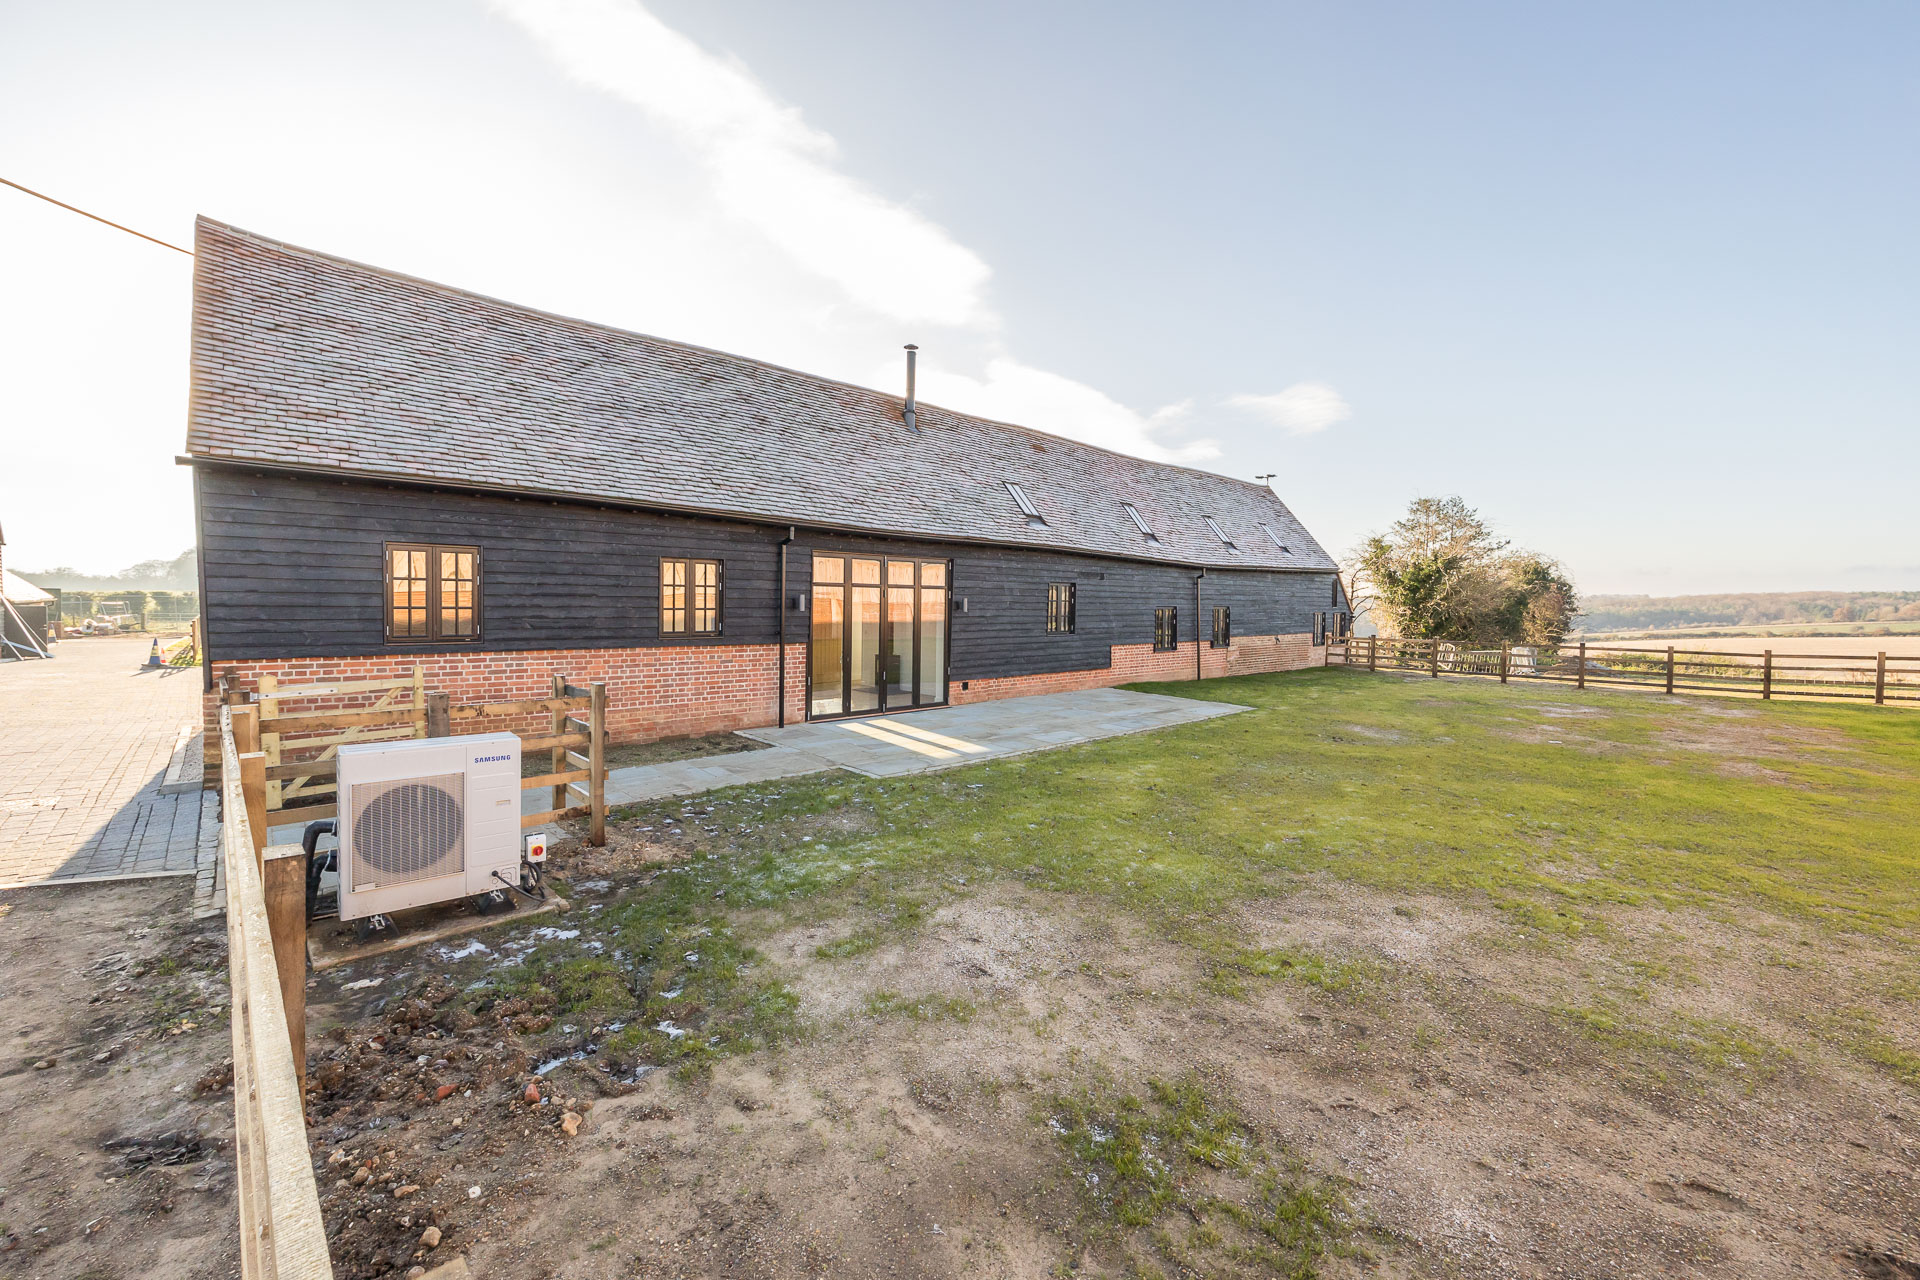 Rear external view from the garden of a refurbished barn with rural land in the background at Hard to Find Farm.